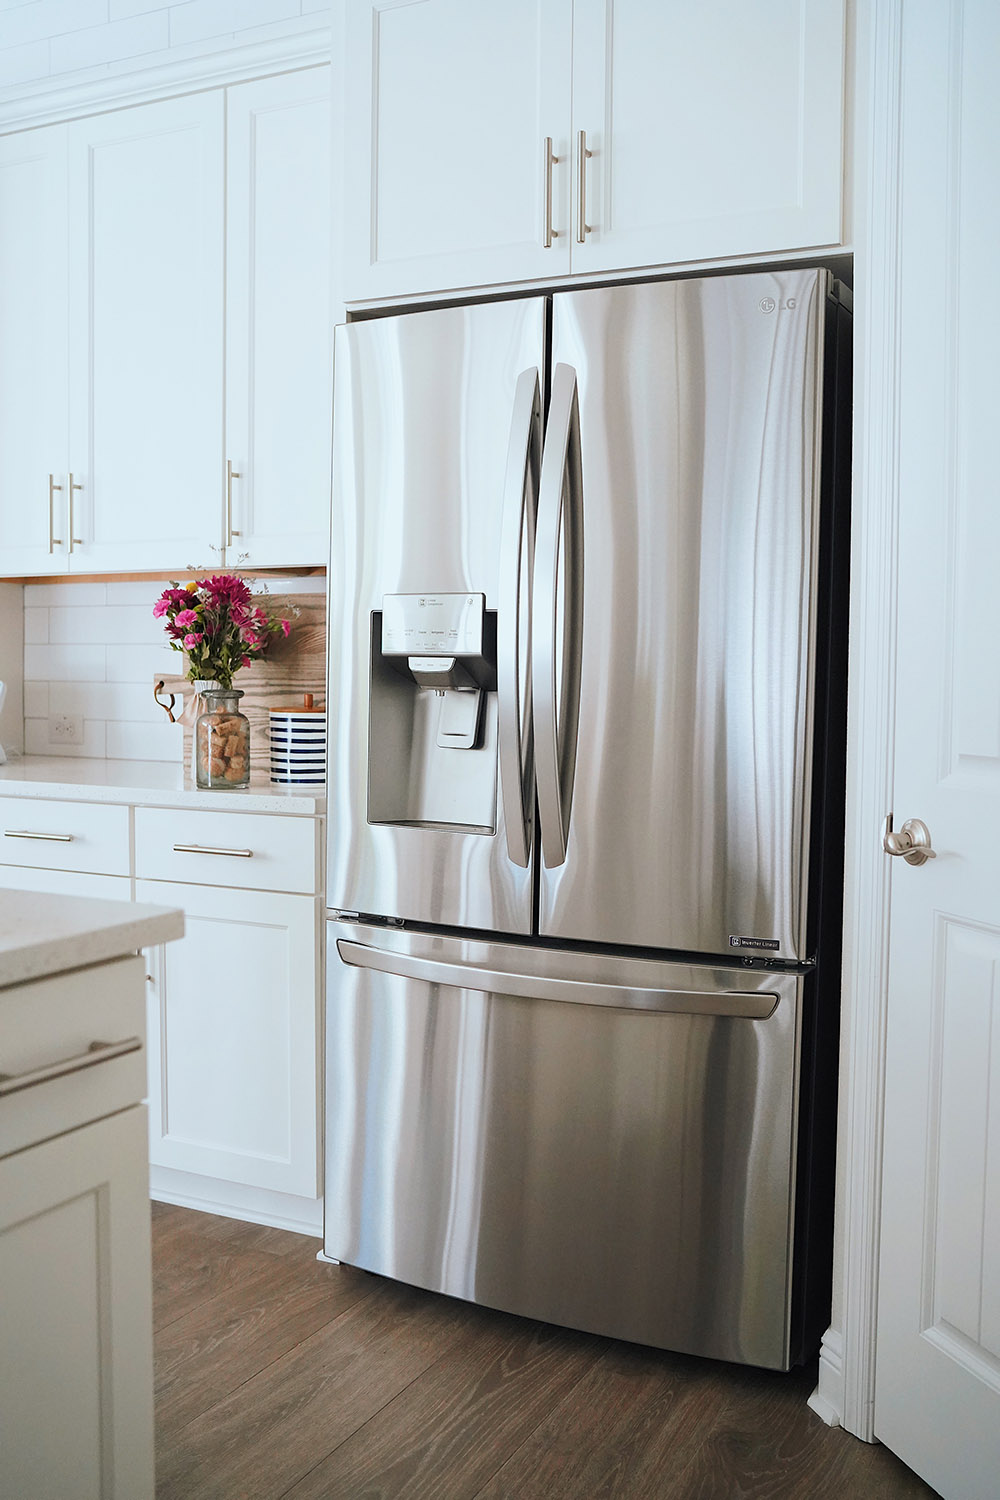 A stainless steel LG refrigerator sits flush against white kitchen cabinets.